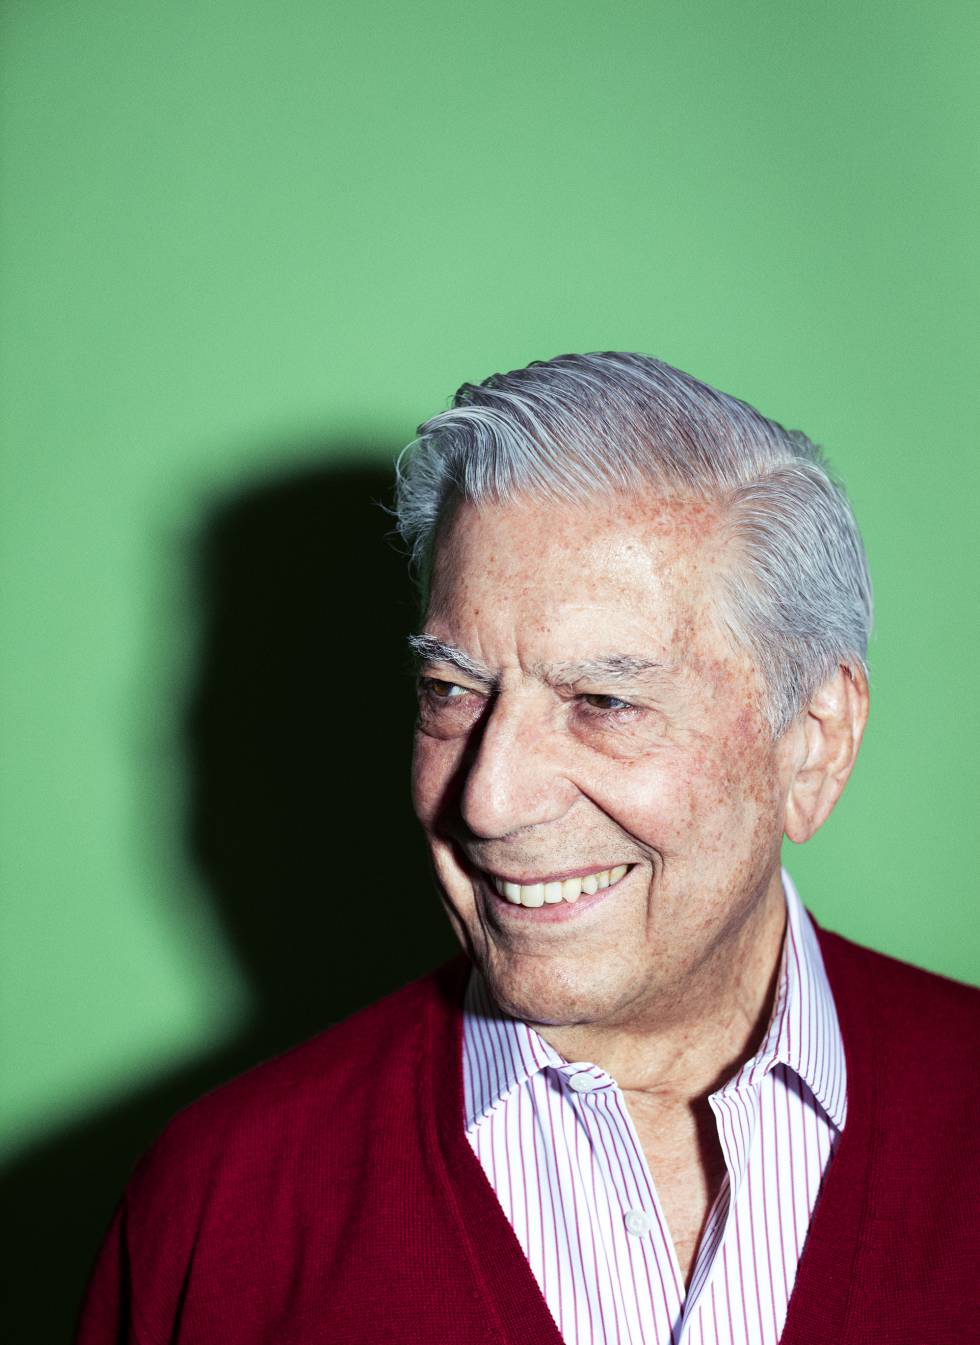 Mario Vargas Llosa: “Political correctness is the enemy of freedom”